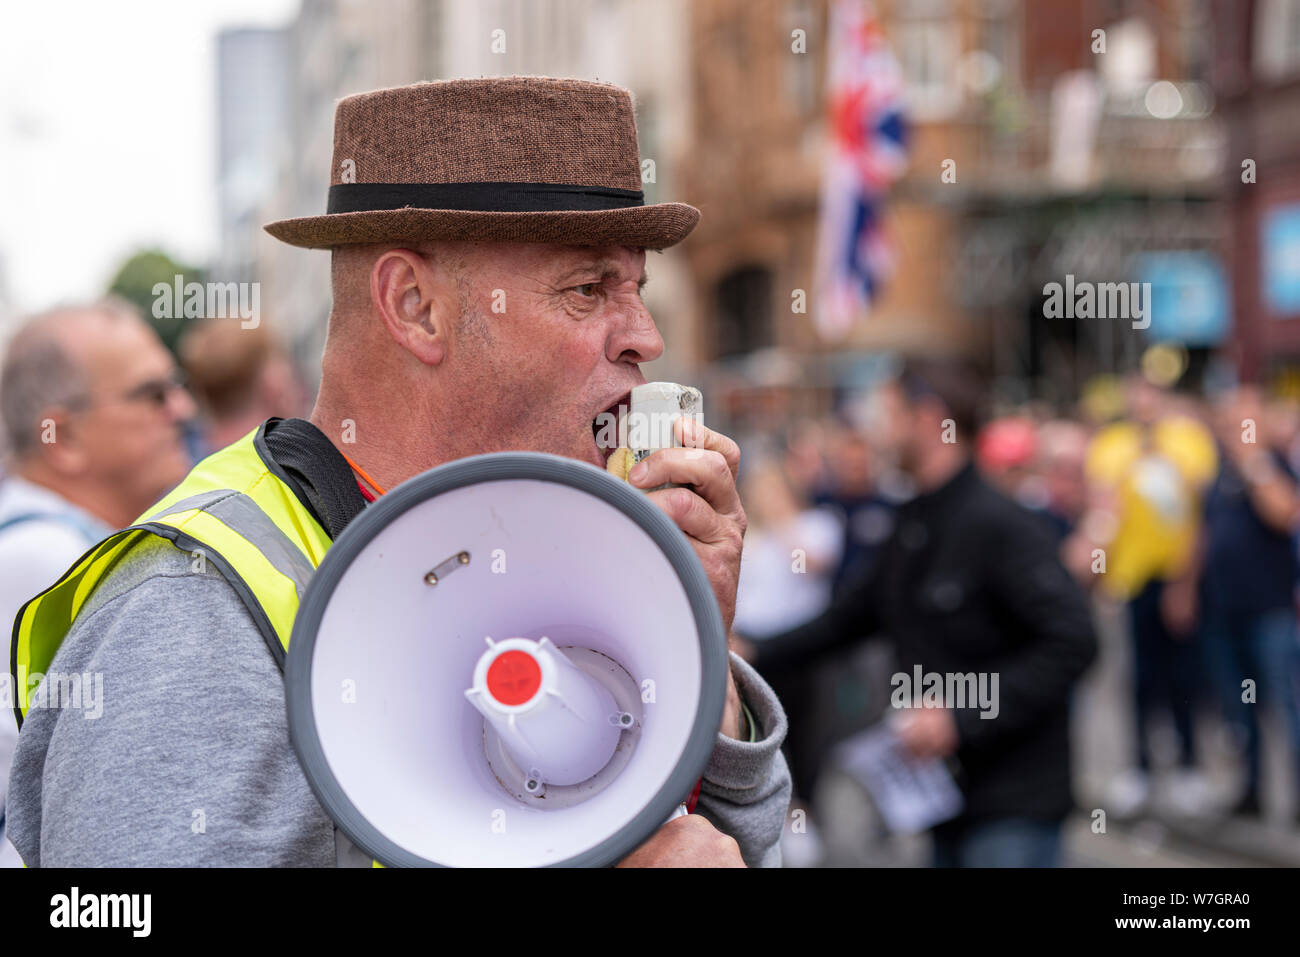 March leader chanting through a loud speaker at Free Tommy Robinson protest rally In London, UK. Angry, anger Stock Photo